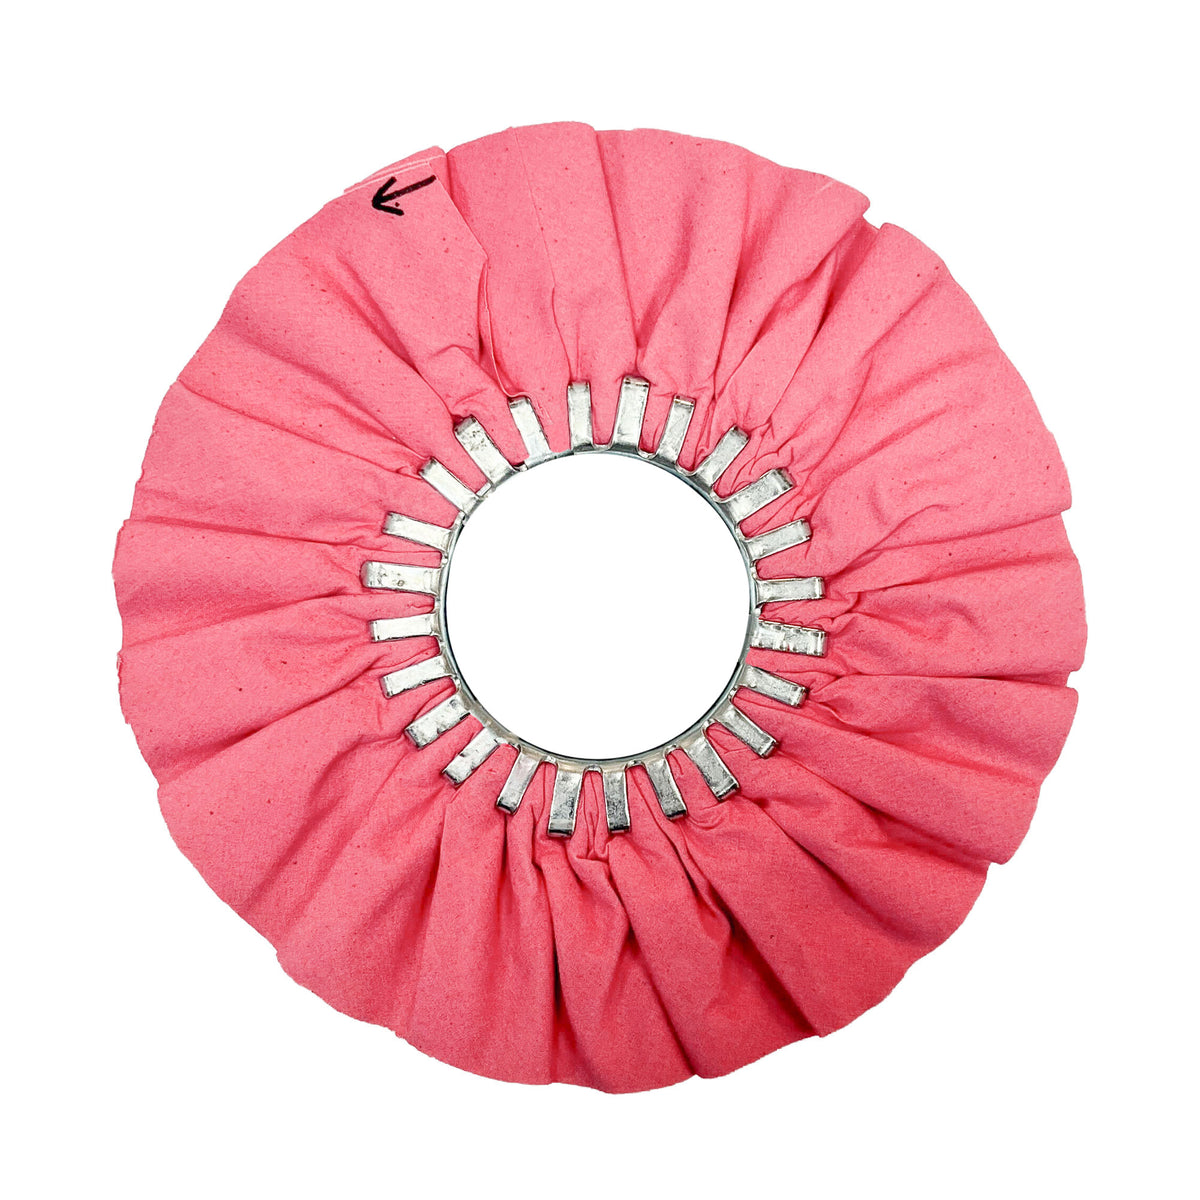 Renegade Products USA Pink Airway Buffing Wheel - High-Quality Buffing Tool for Efficient Polishing and Finishing Tasks